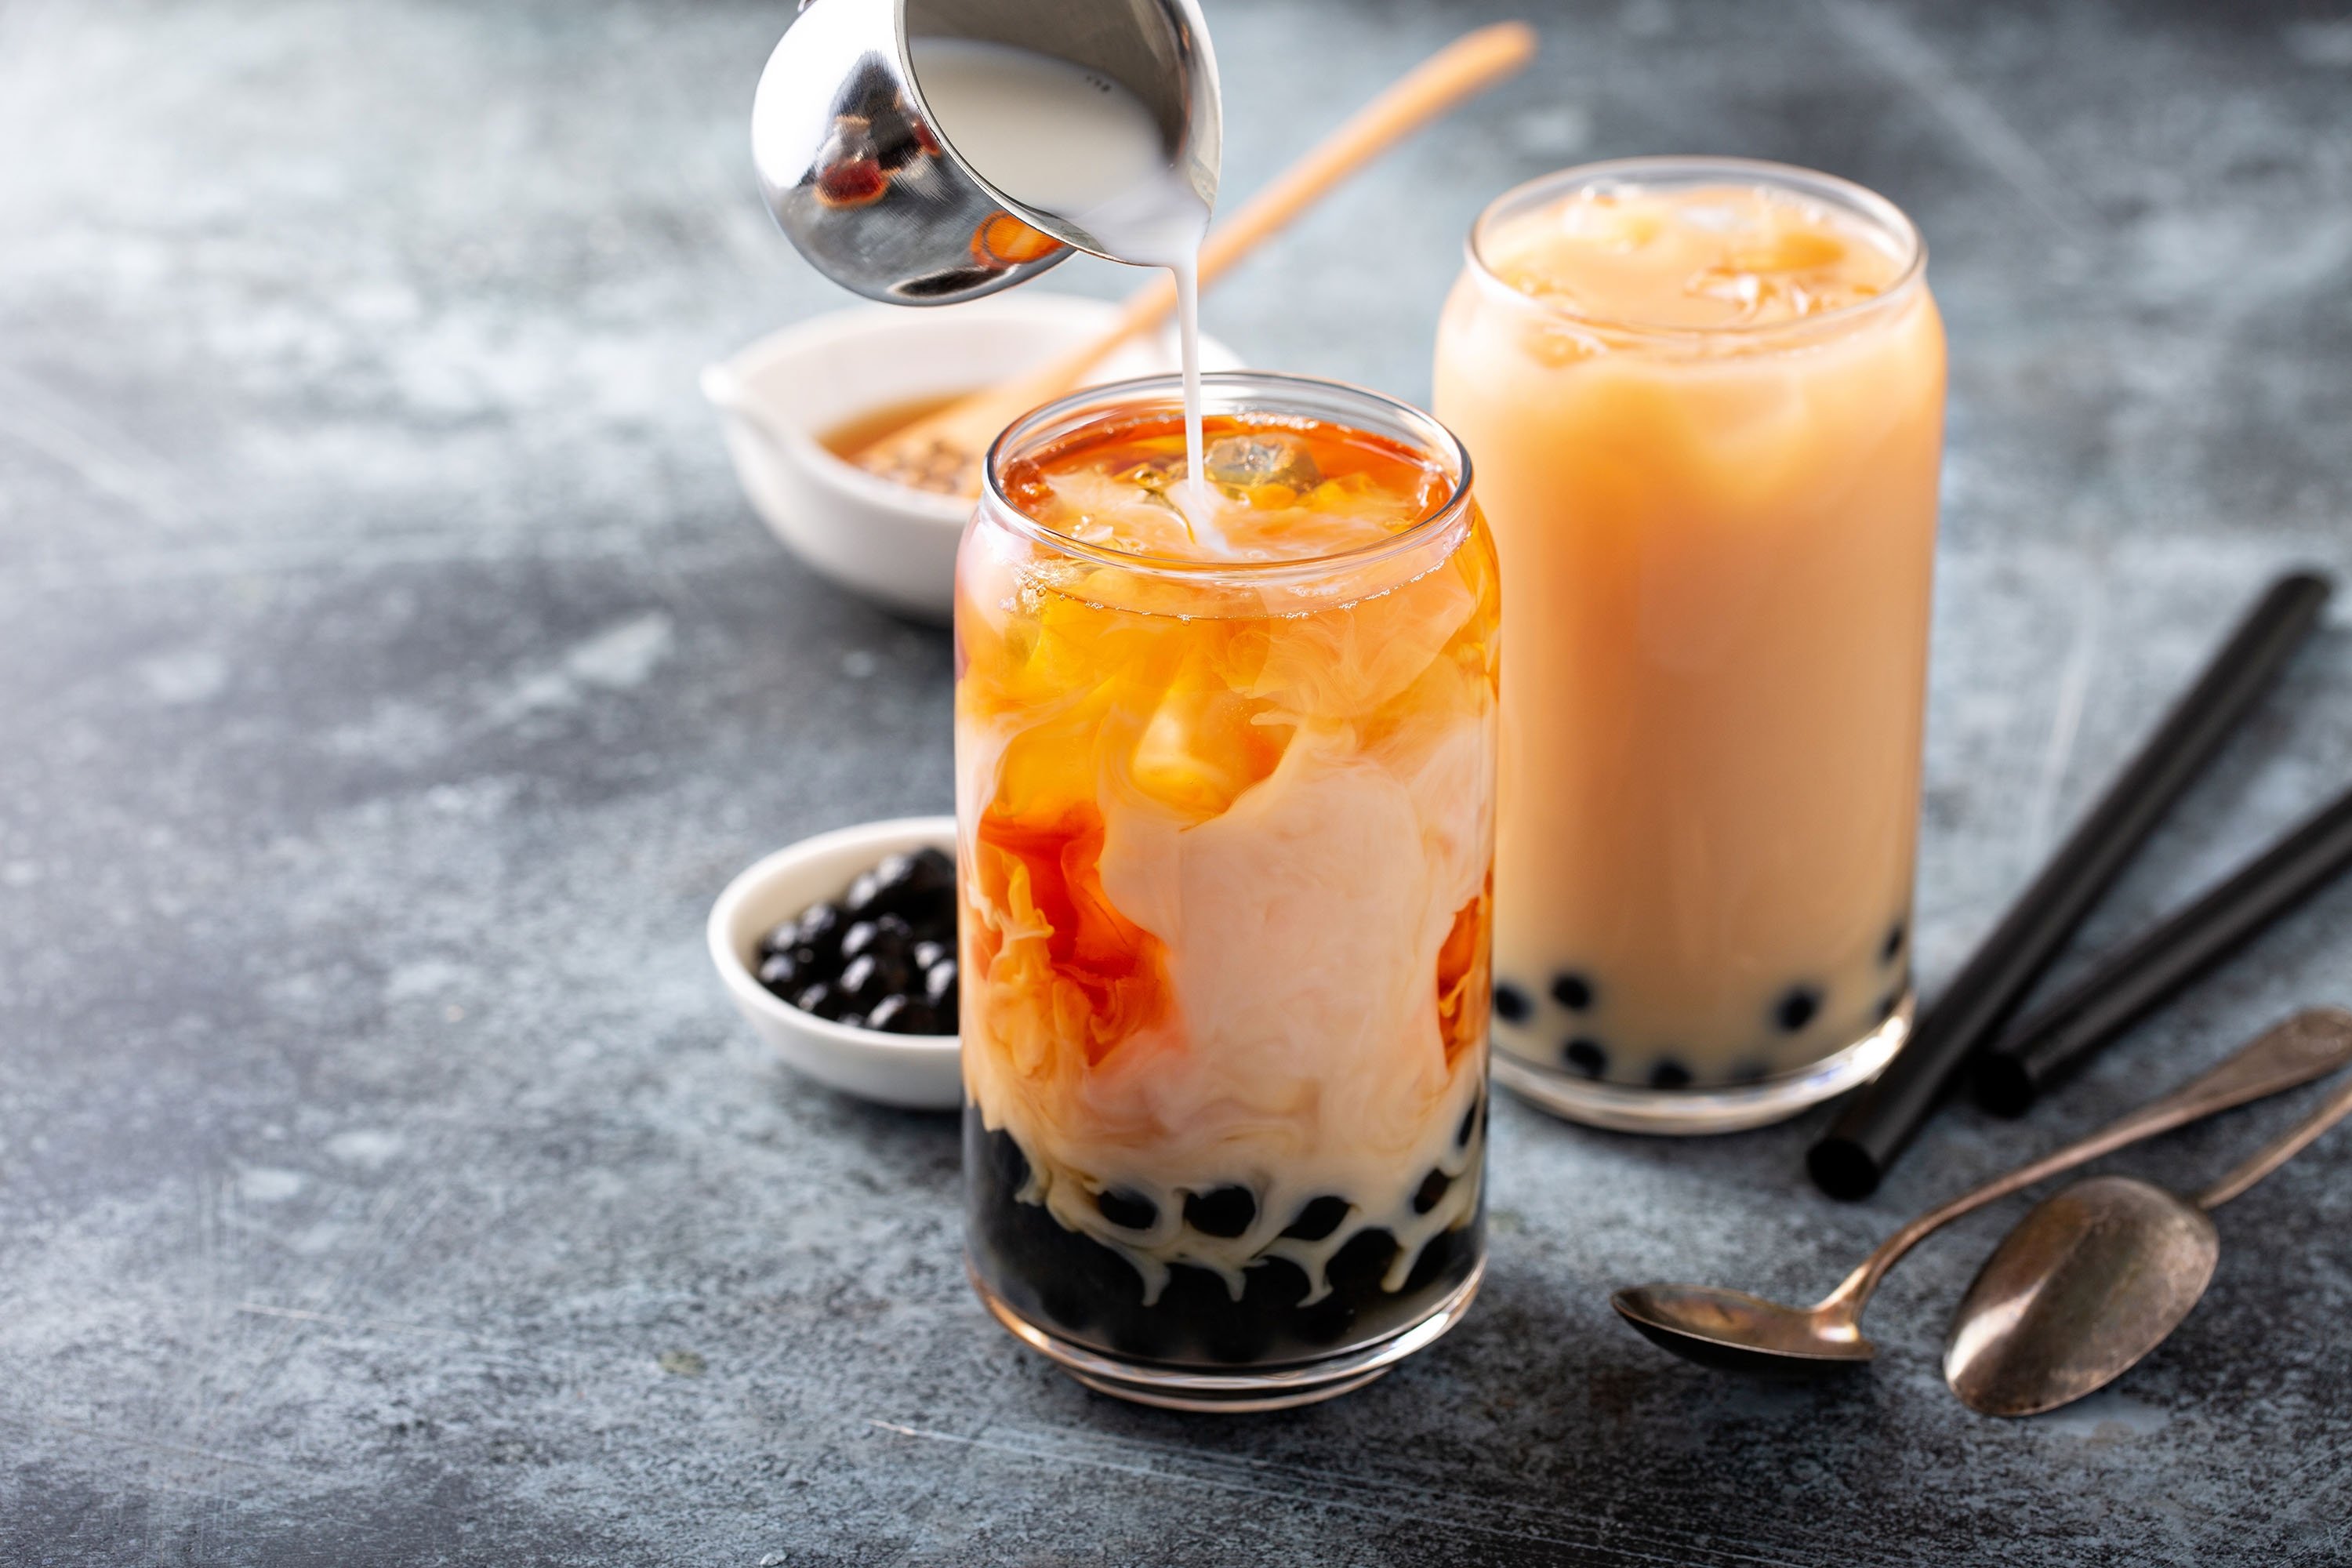 How to make bubble tea, completely from scratch | Daily Sabah